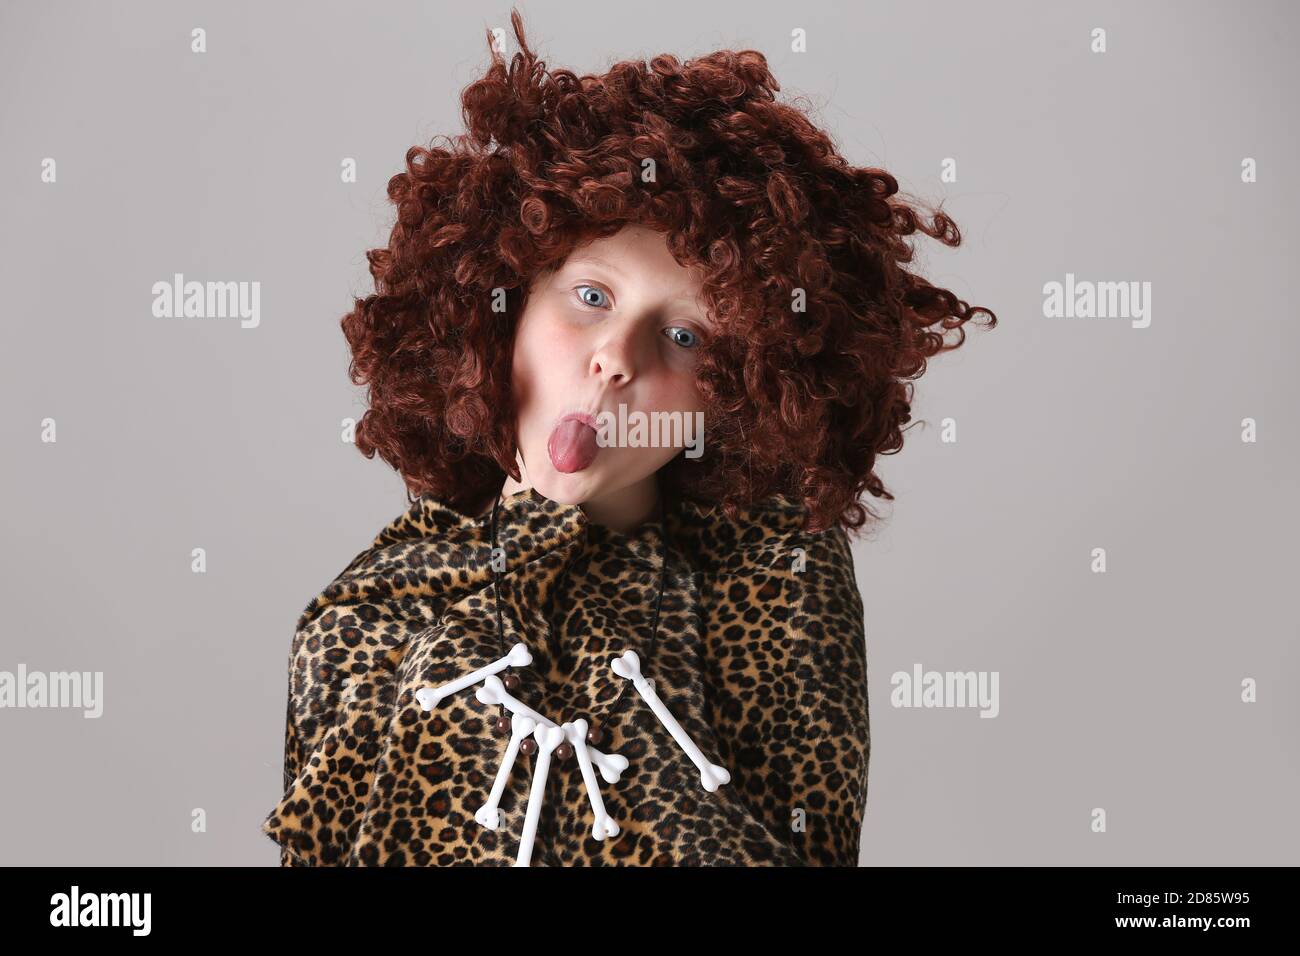 young girl in leopard skin cloak wearing  1960s, 1970s style Afro wig and a necklace made of toy bones cheekily sticking her tongue out Stock Photo